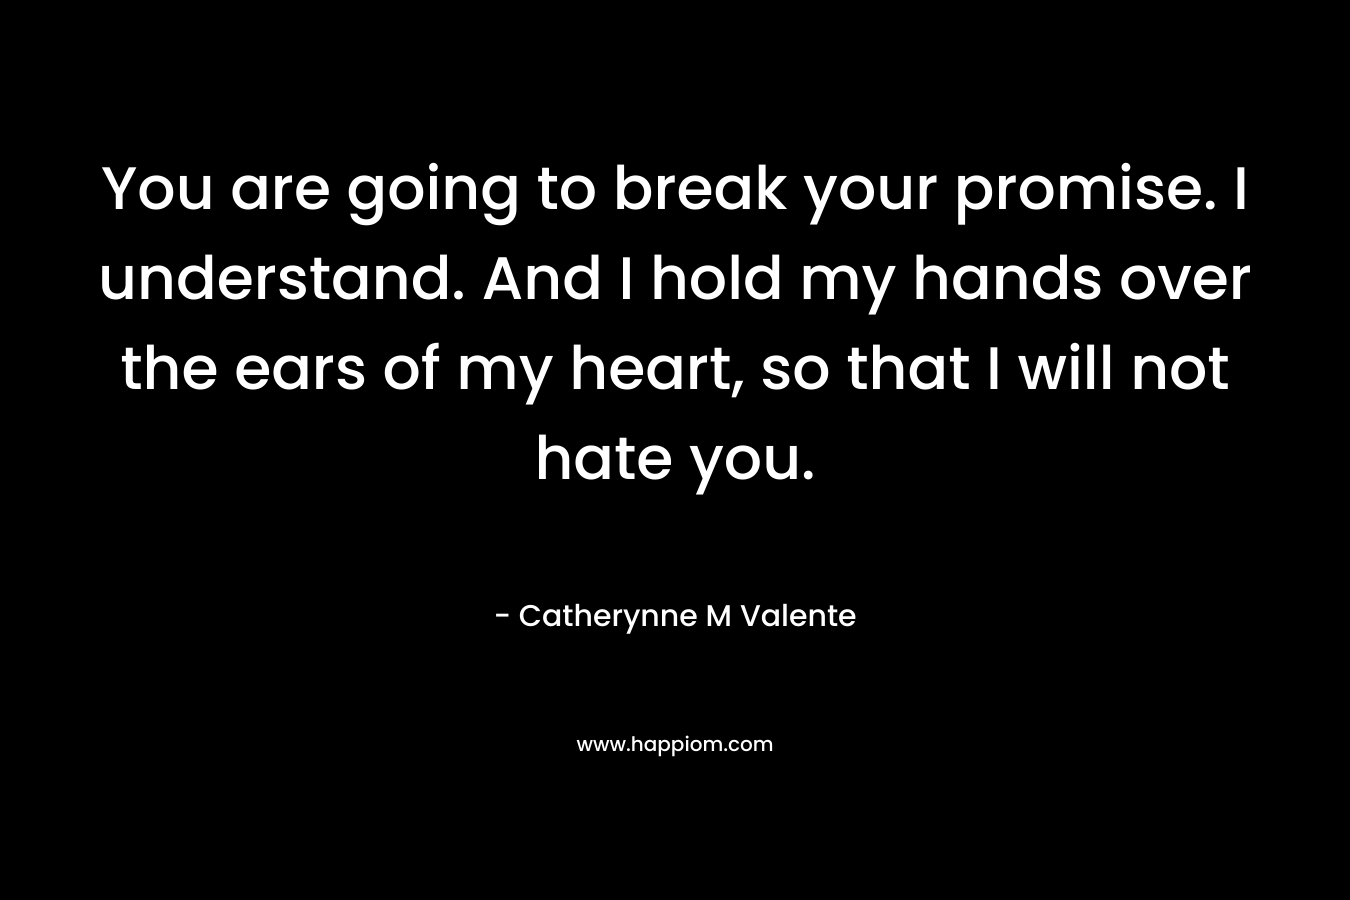 You are going to break your promise. I understand. And I hold my hands over the ears of my heart, so that I will not hate you.